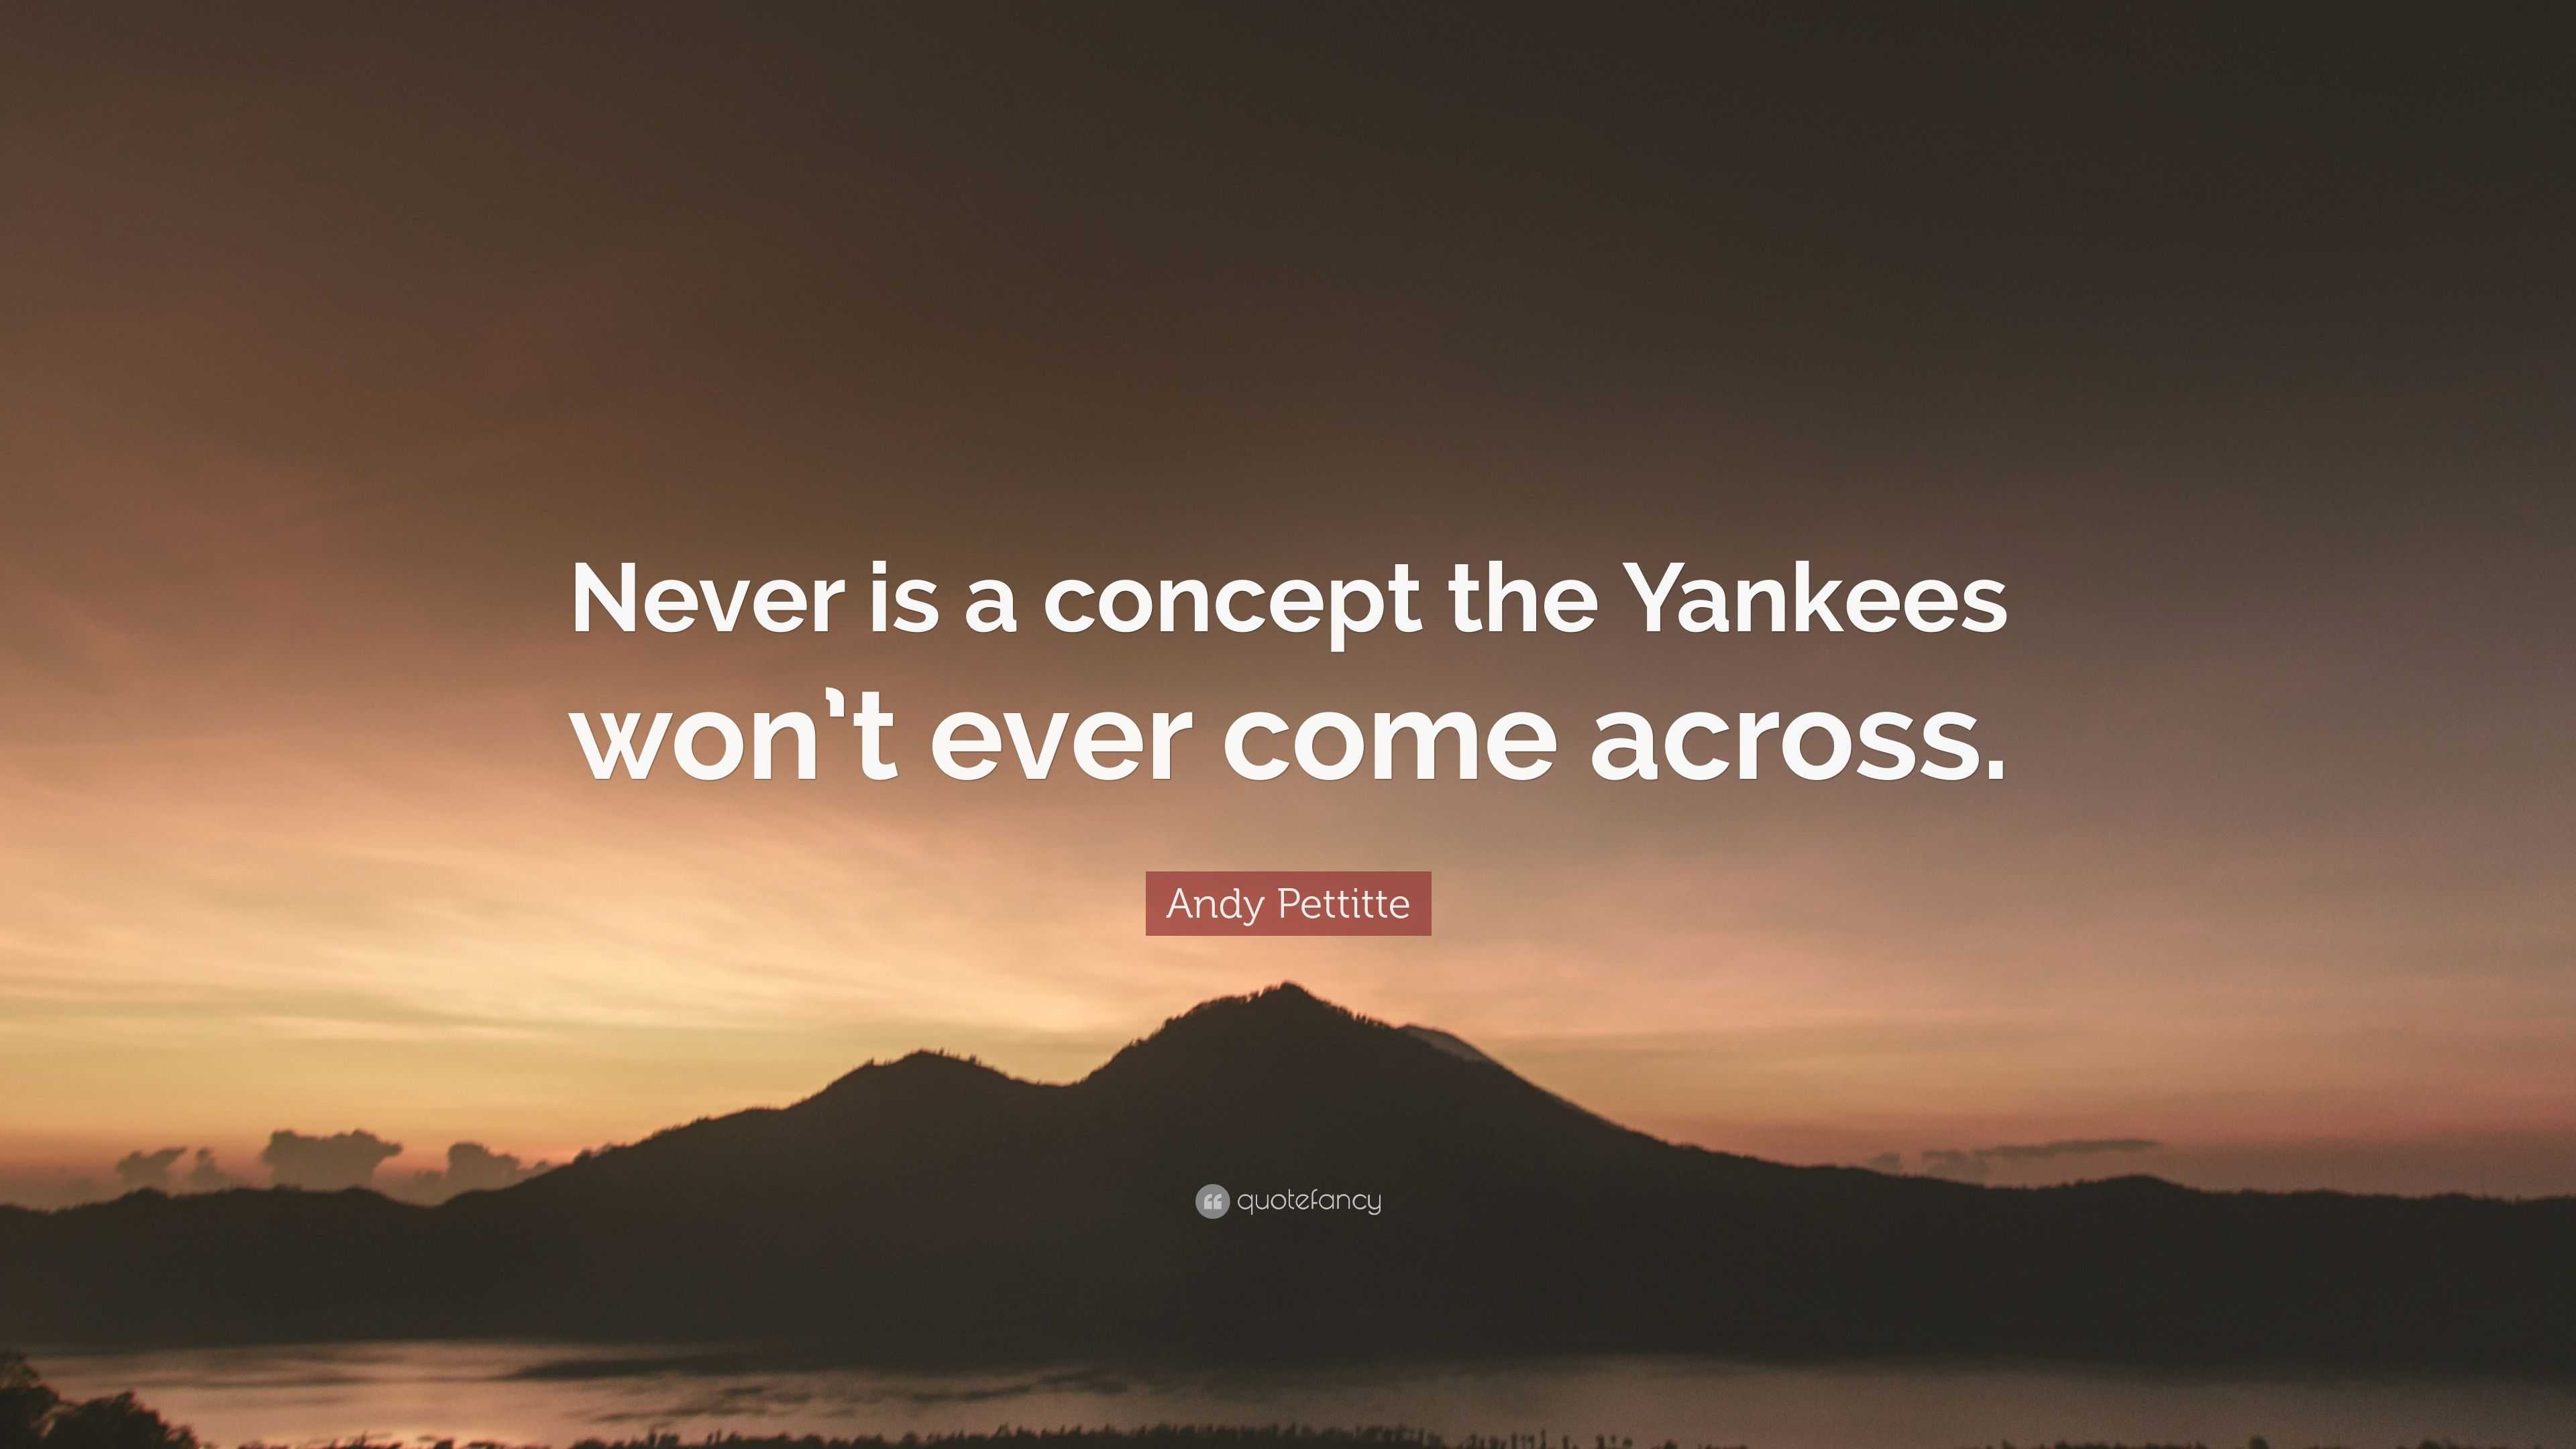 Andy Pettitte Quote: “Never is a concept the Yankees won't ever